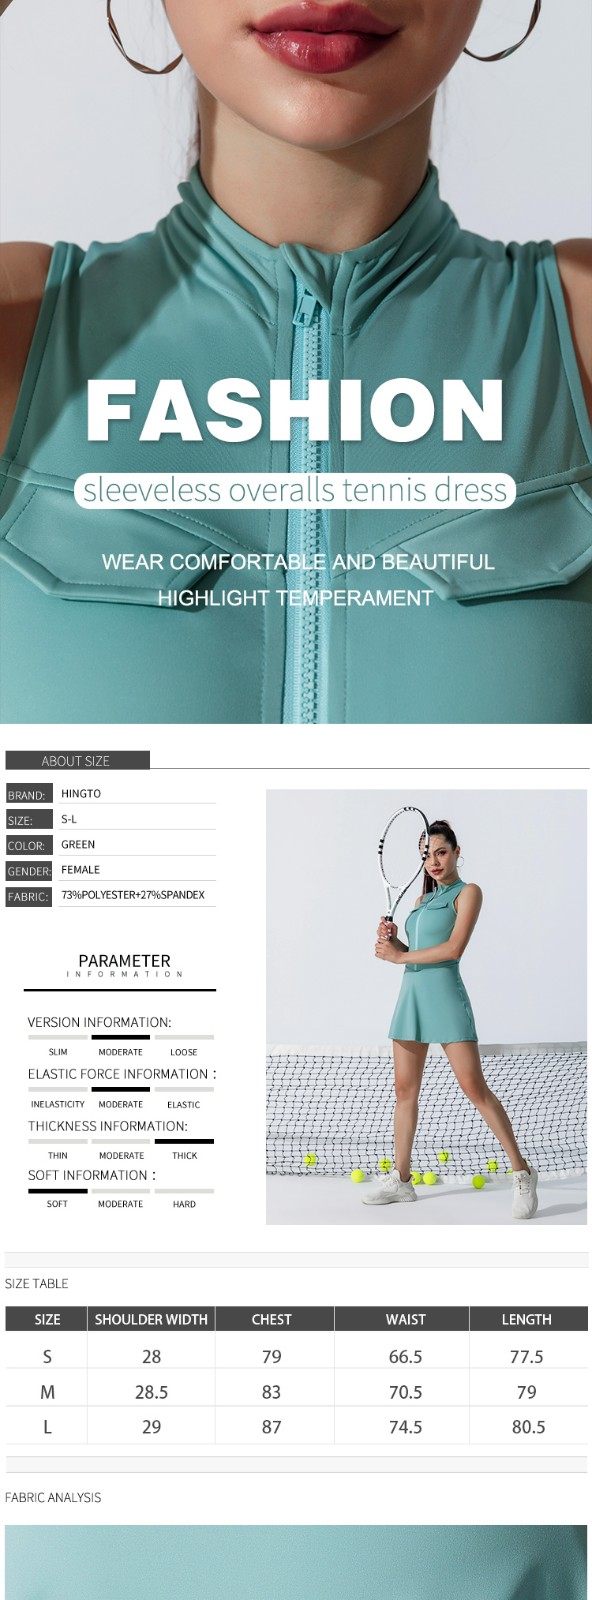 personalized women's tennis outfits experts-2